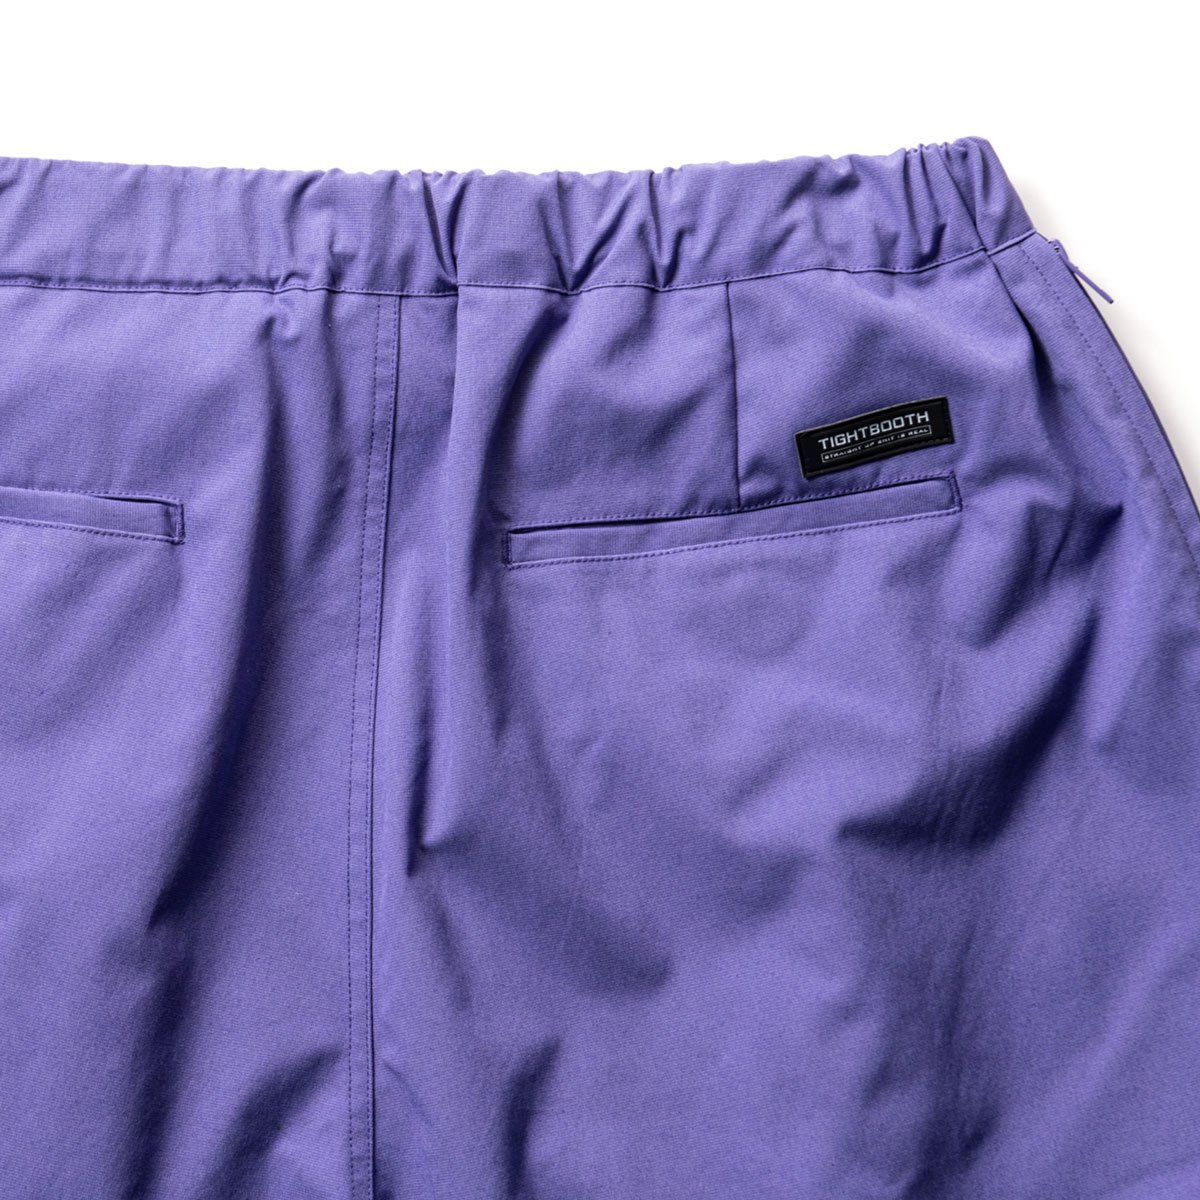 TIGHTBOOTH - TC DUCK SHORTS - SHRED